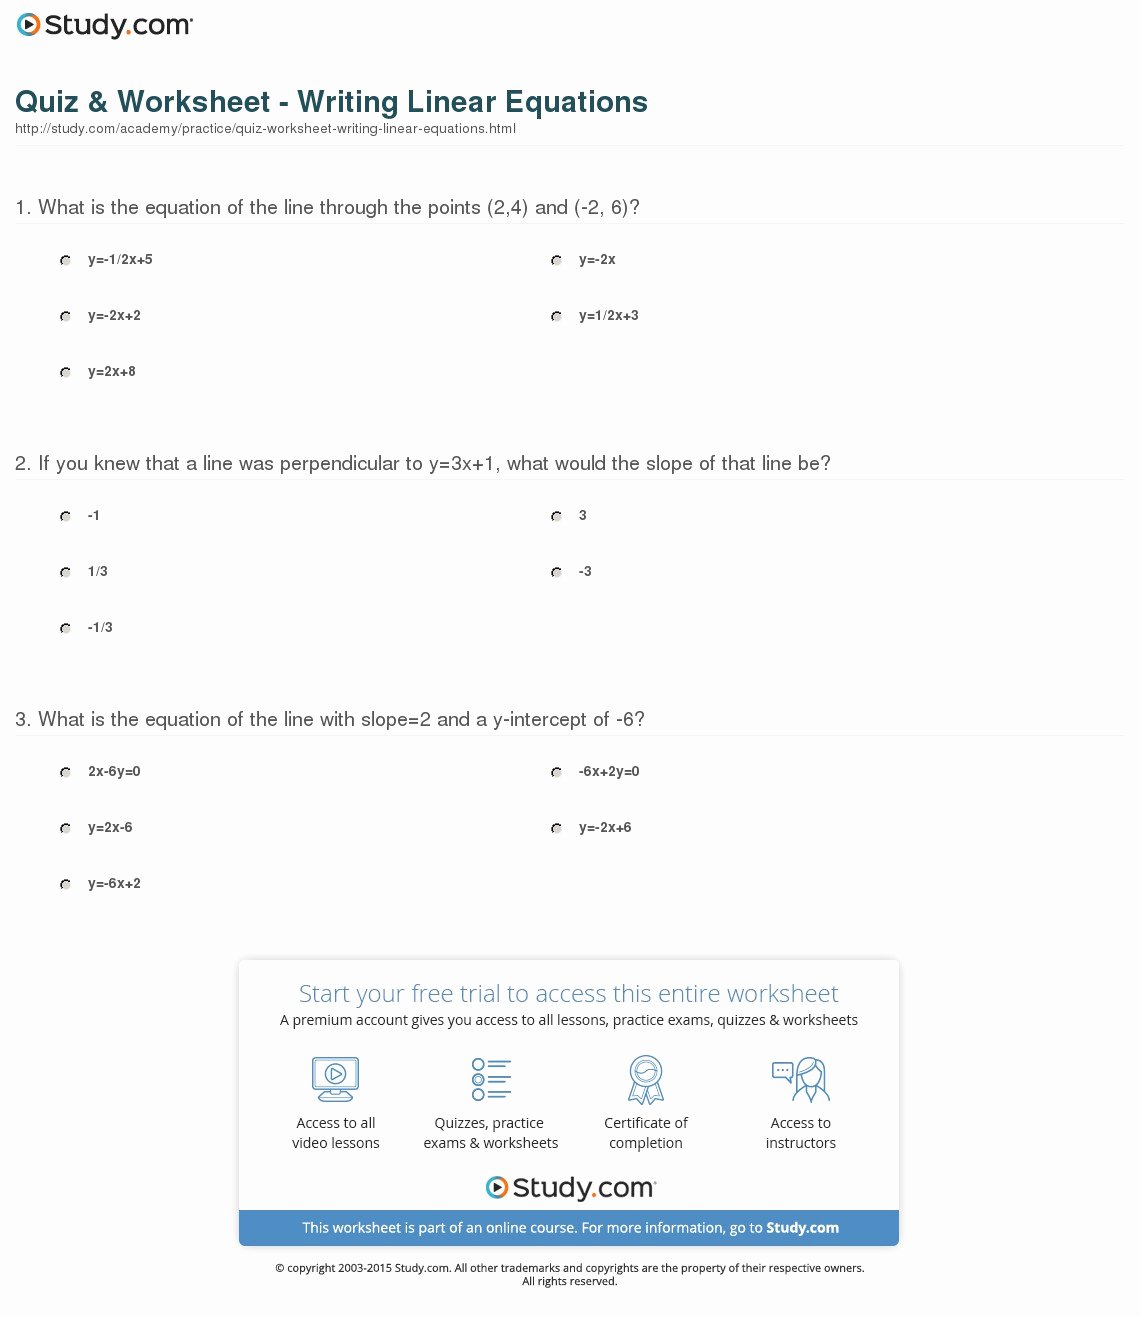 Writing Linear Equations Worksheet Answers Elegant Quiz &amp; Worksheet Writing Linear Equations